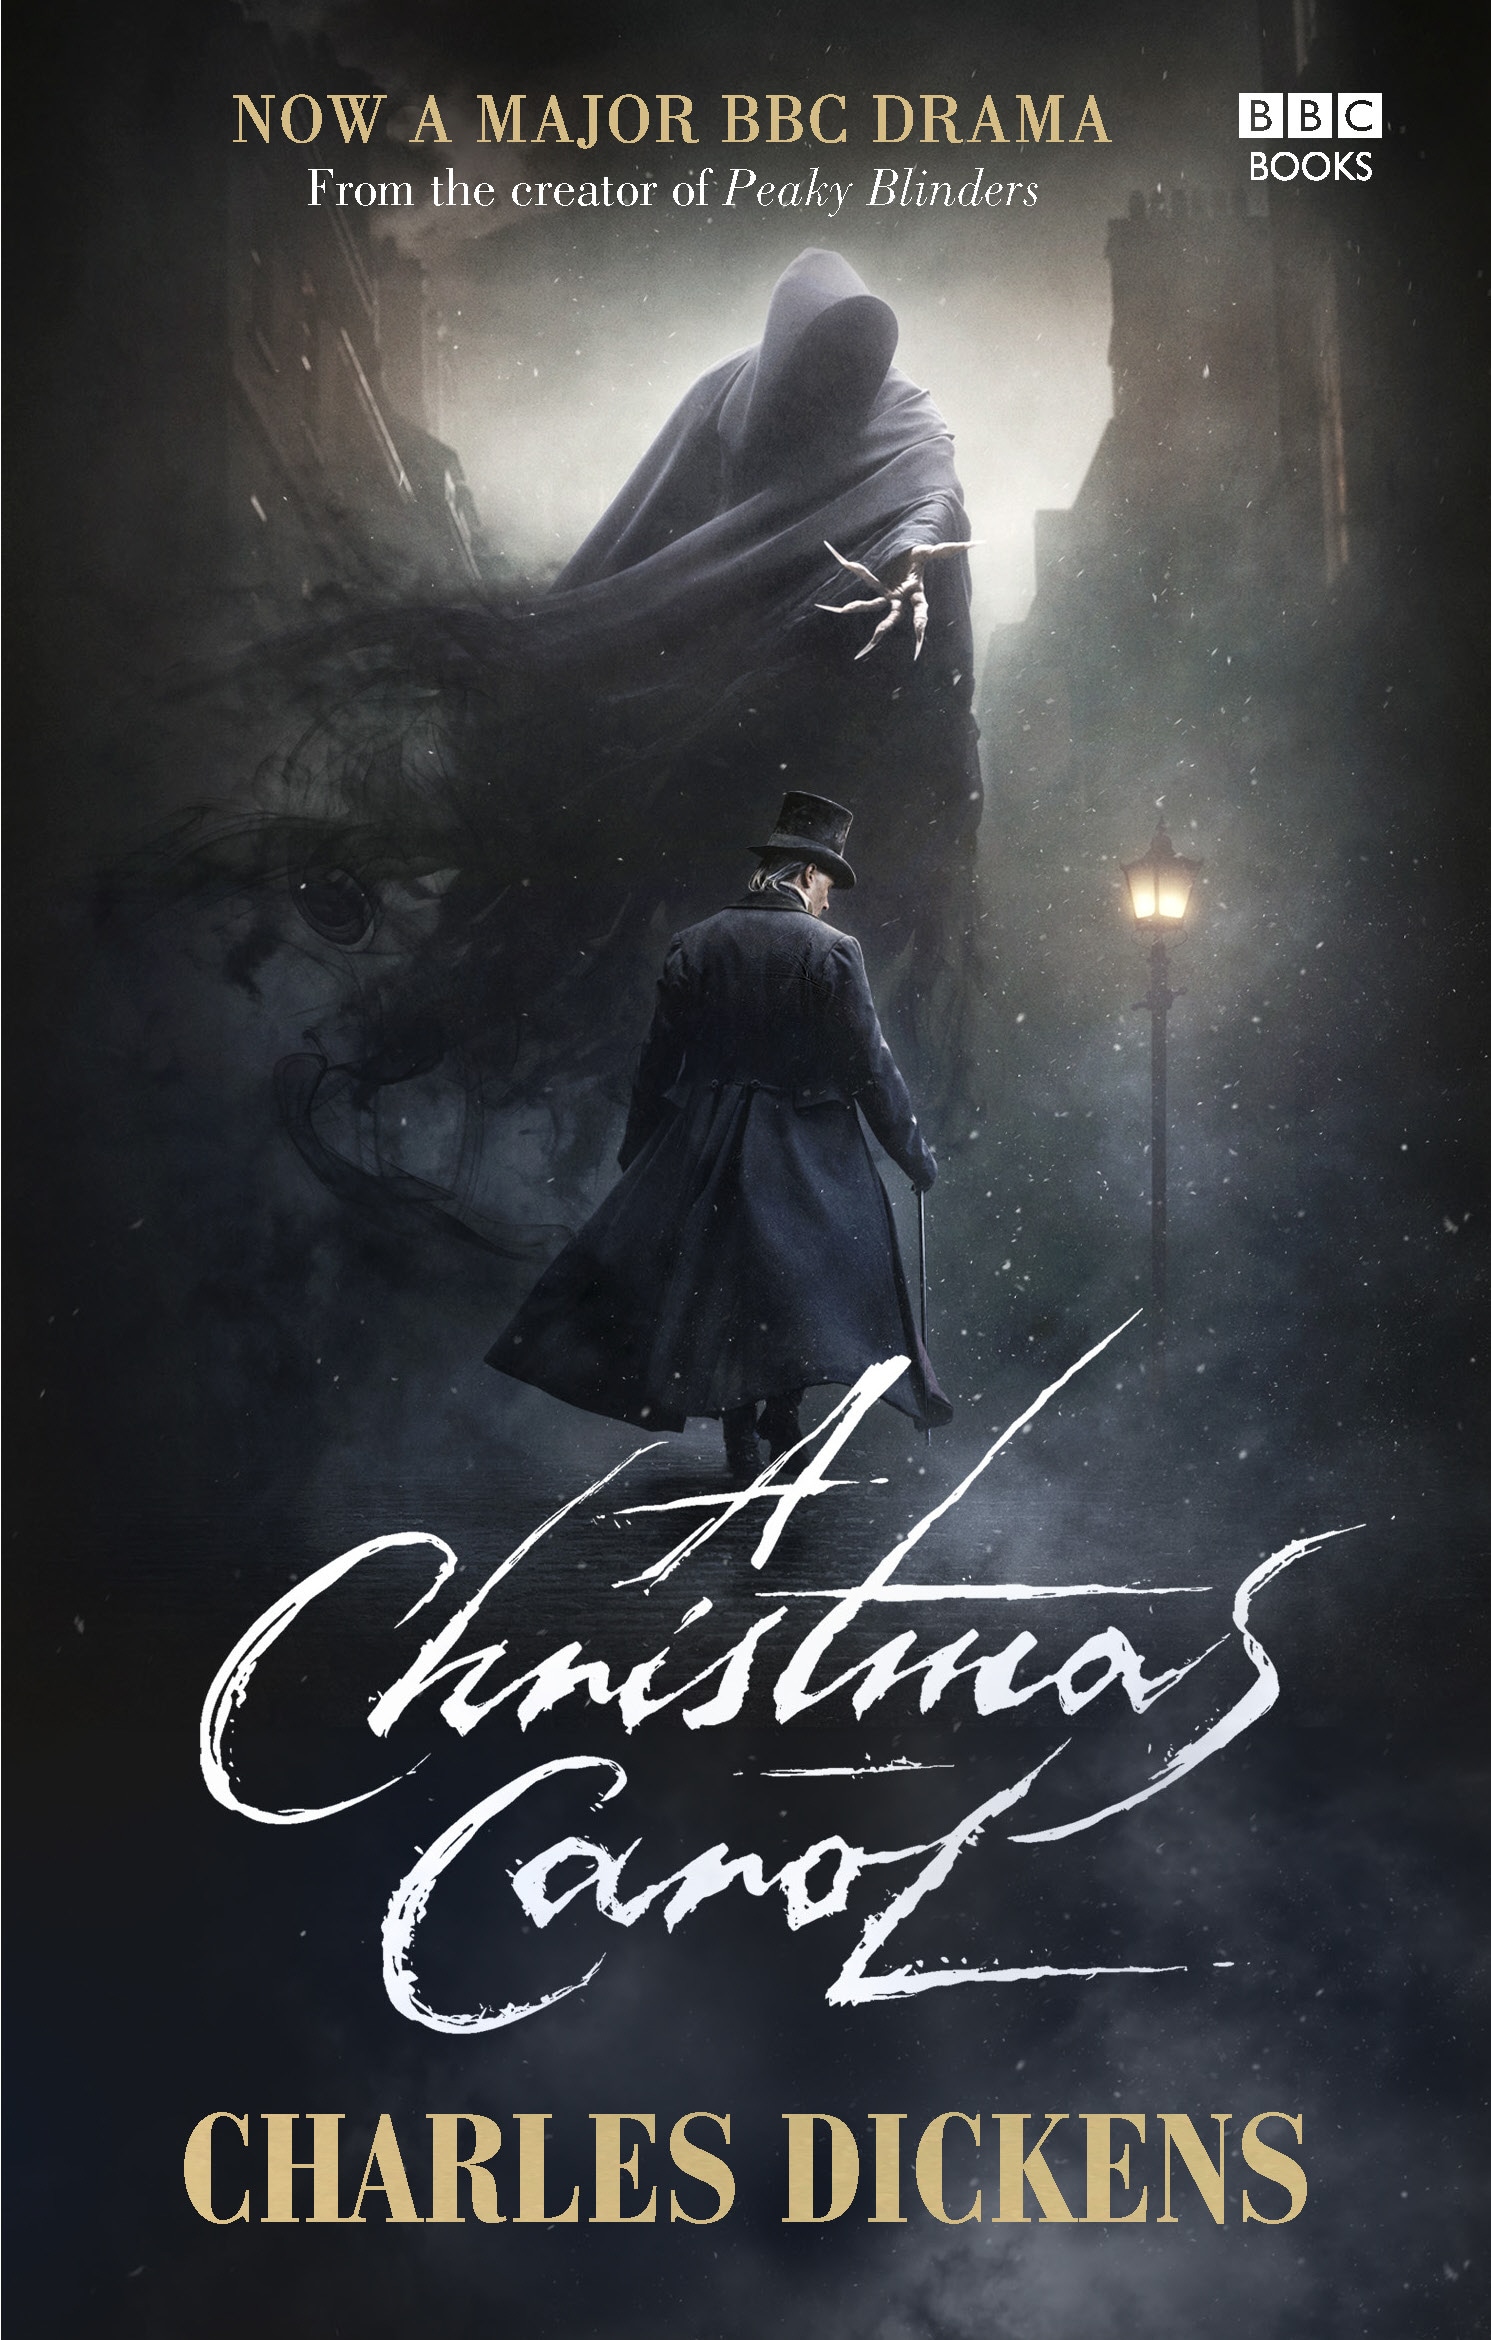 Book “A Christmas Carol BBC TV Tie-In” by Charles Dickens — December 5, 2019